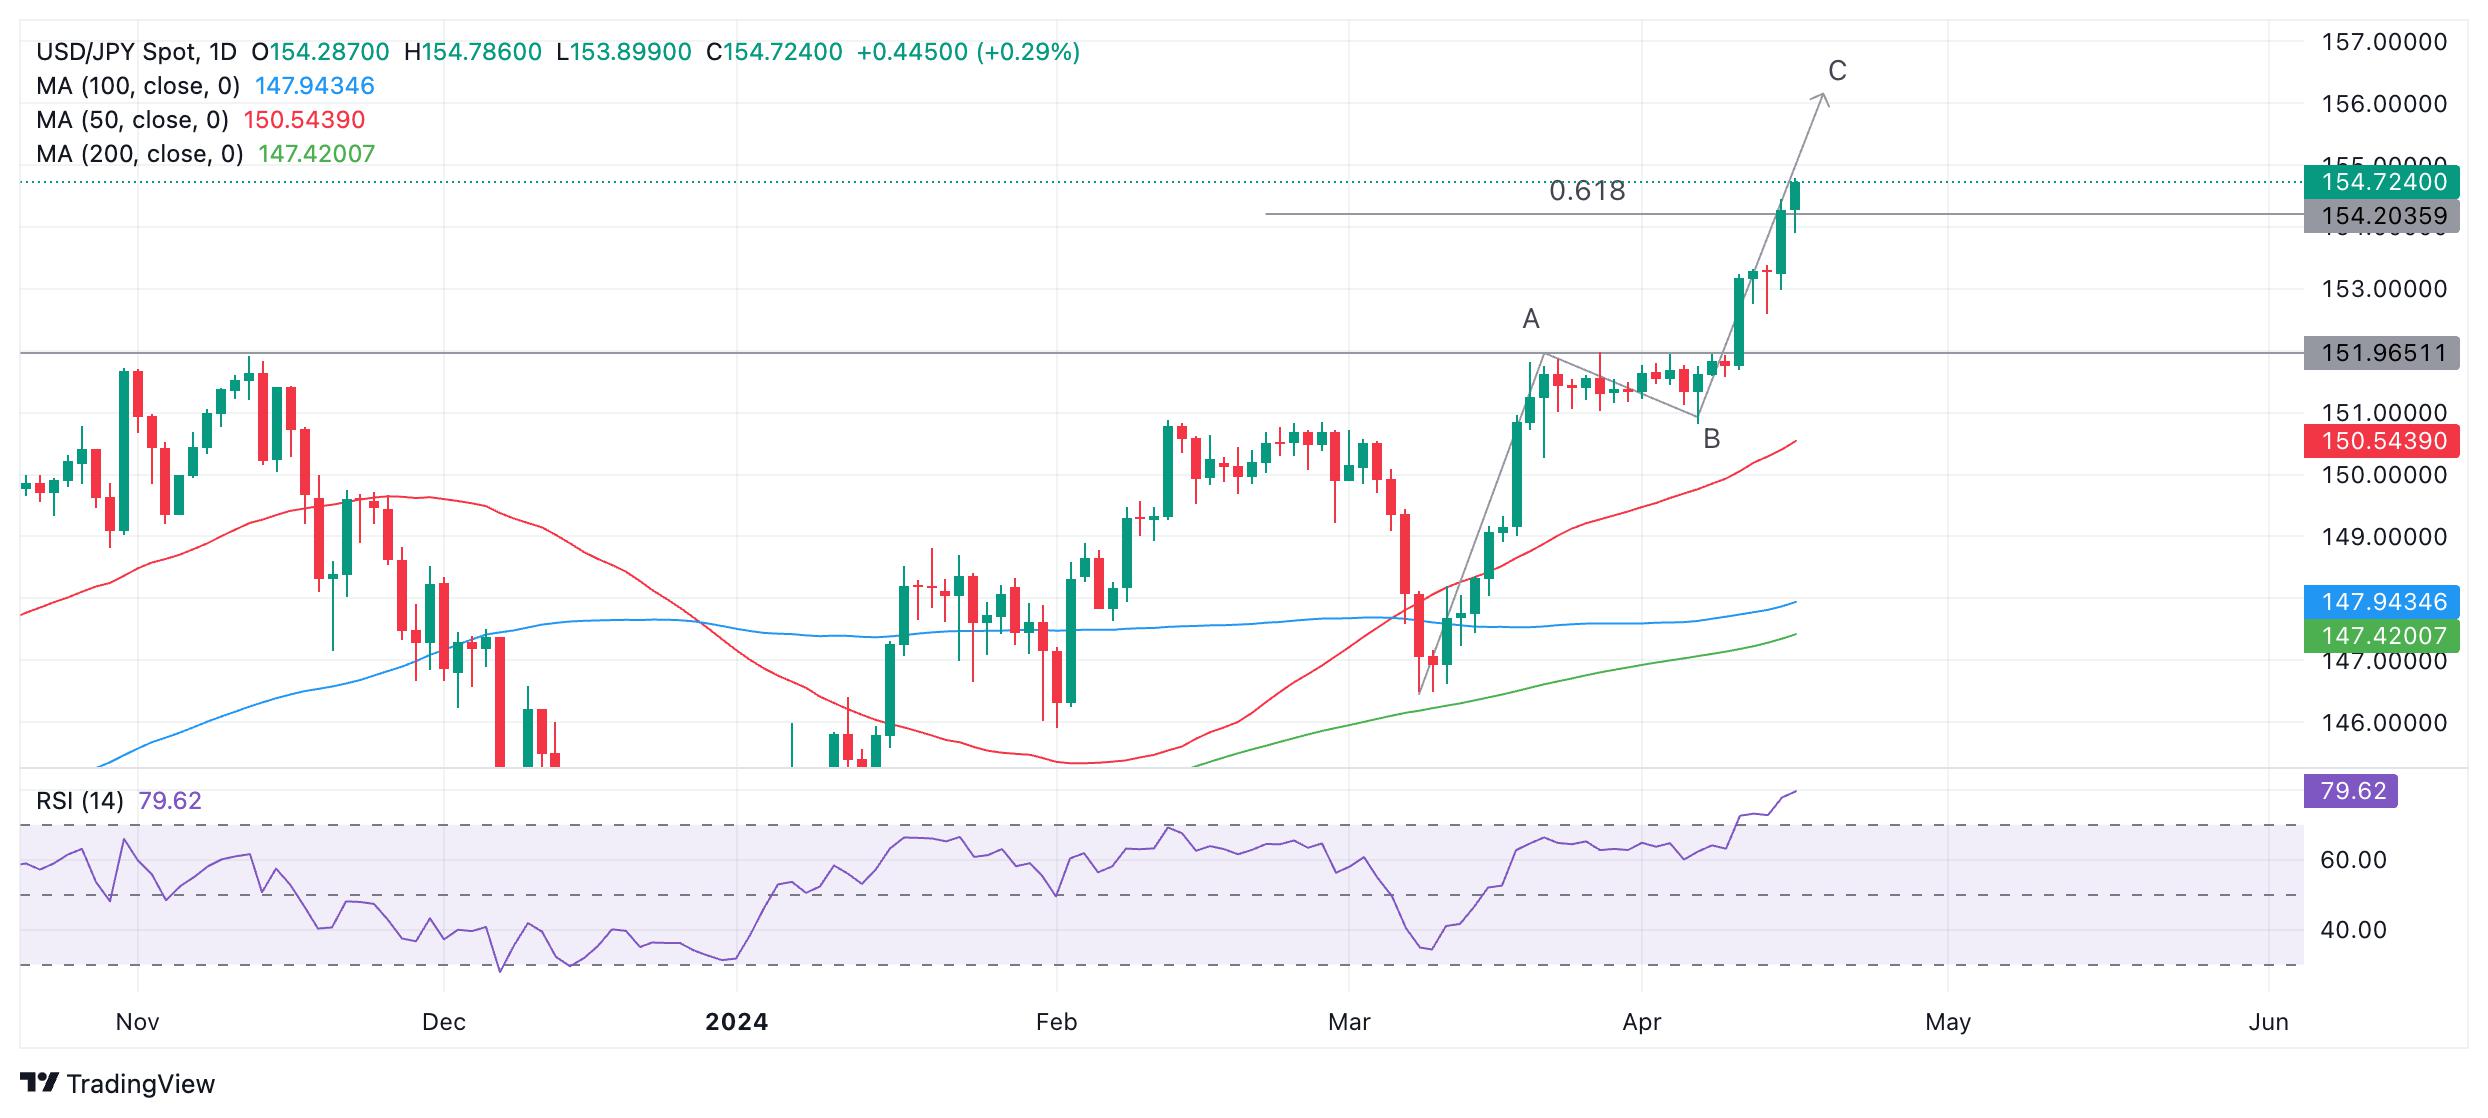 USD/JPY Price Analysis: Dominant uptrend continues